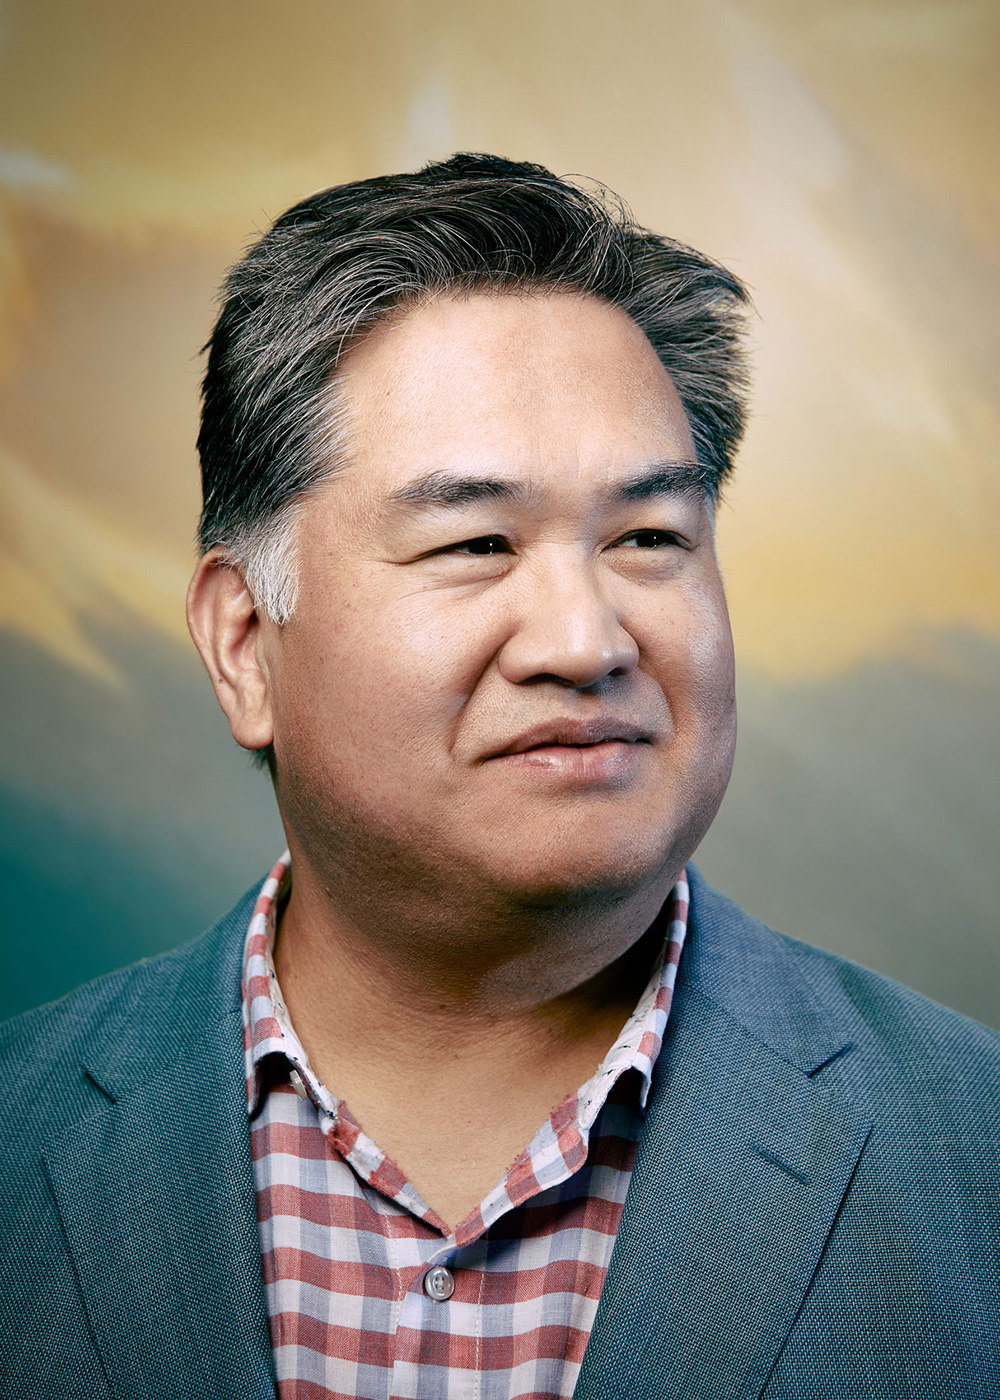 Raymond Wu, vice president, business affairs and legal counsel at Lucasfilm